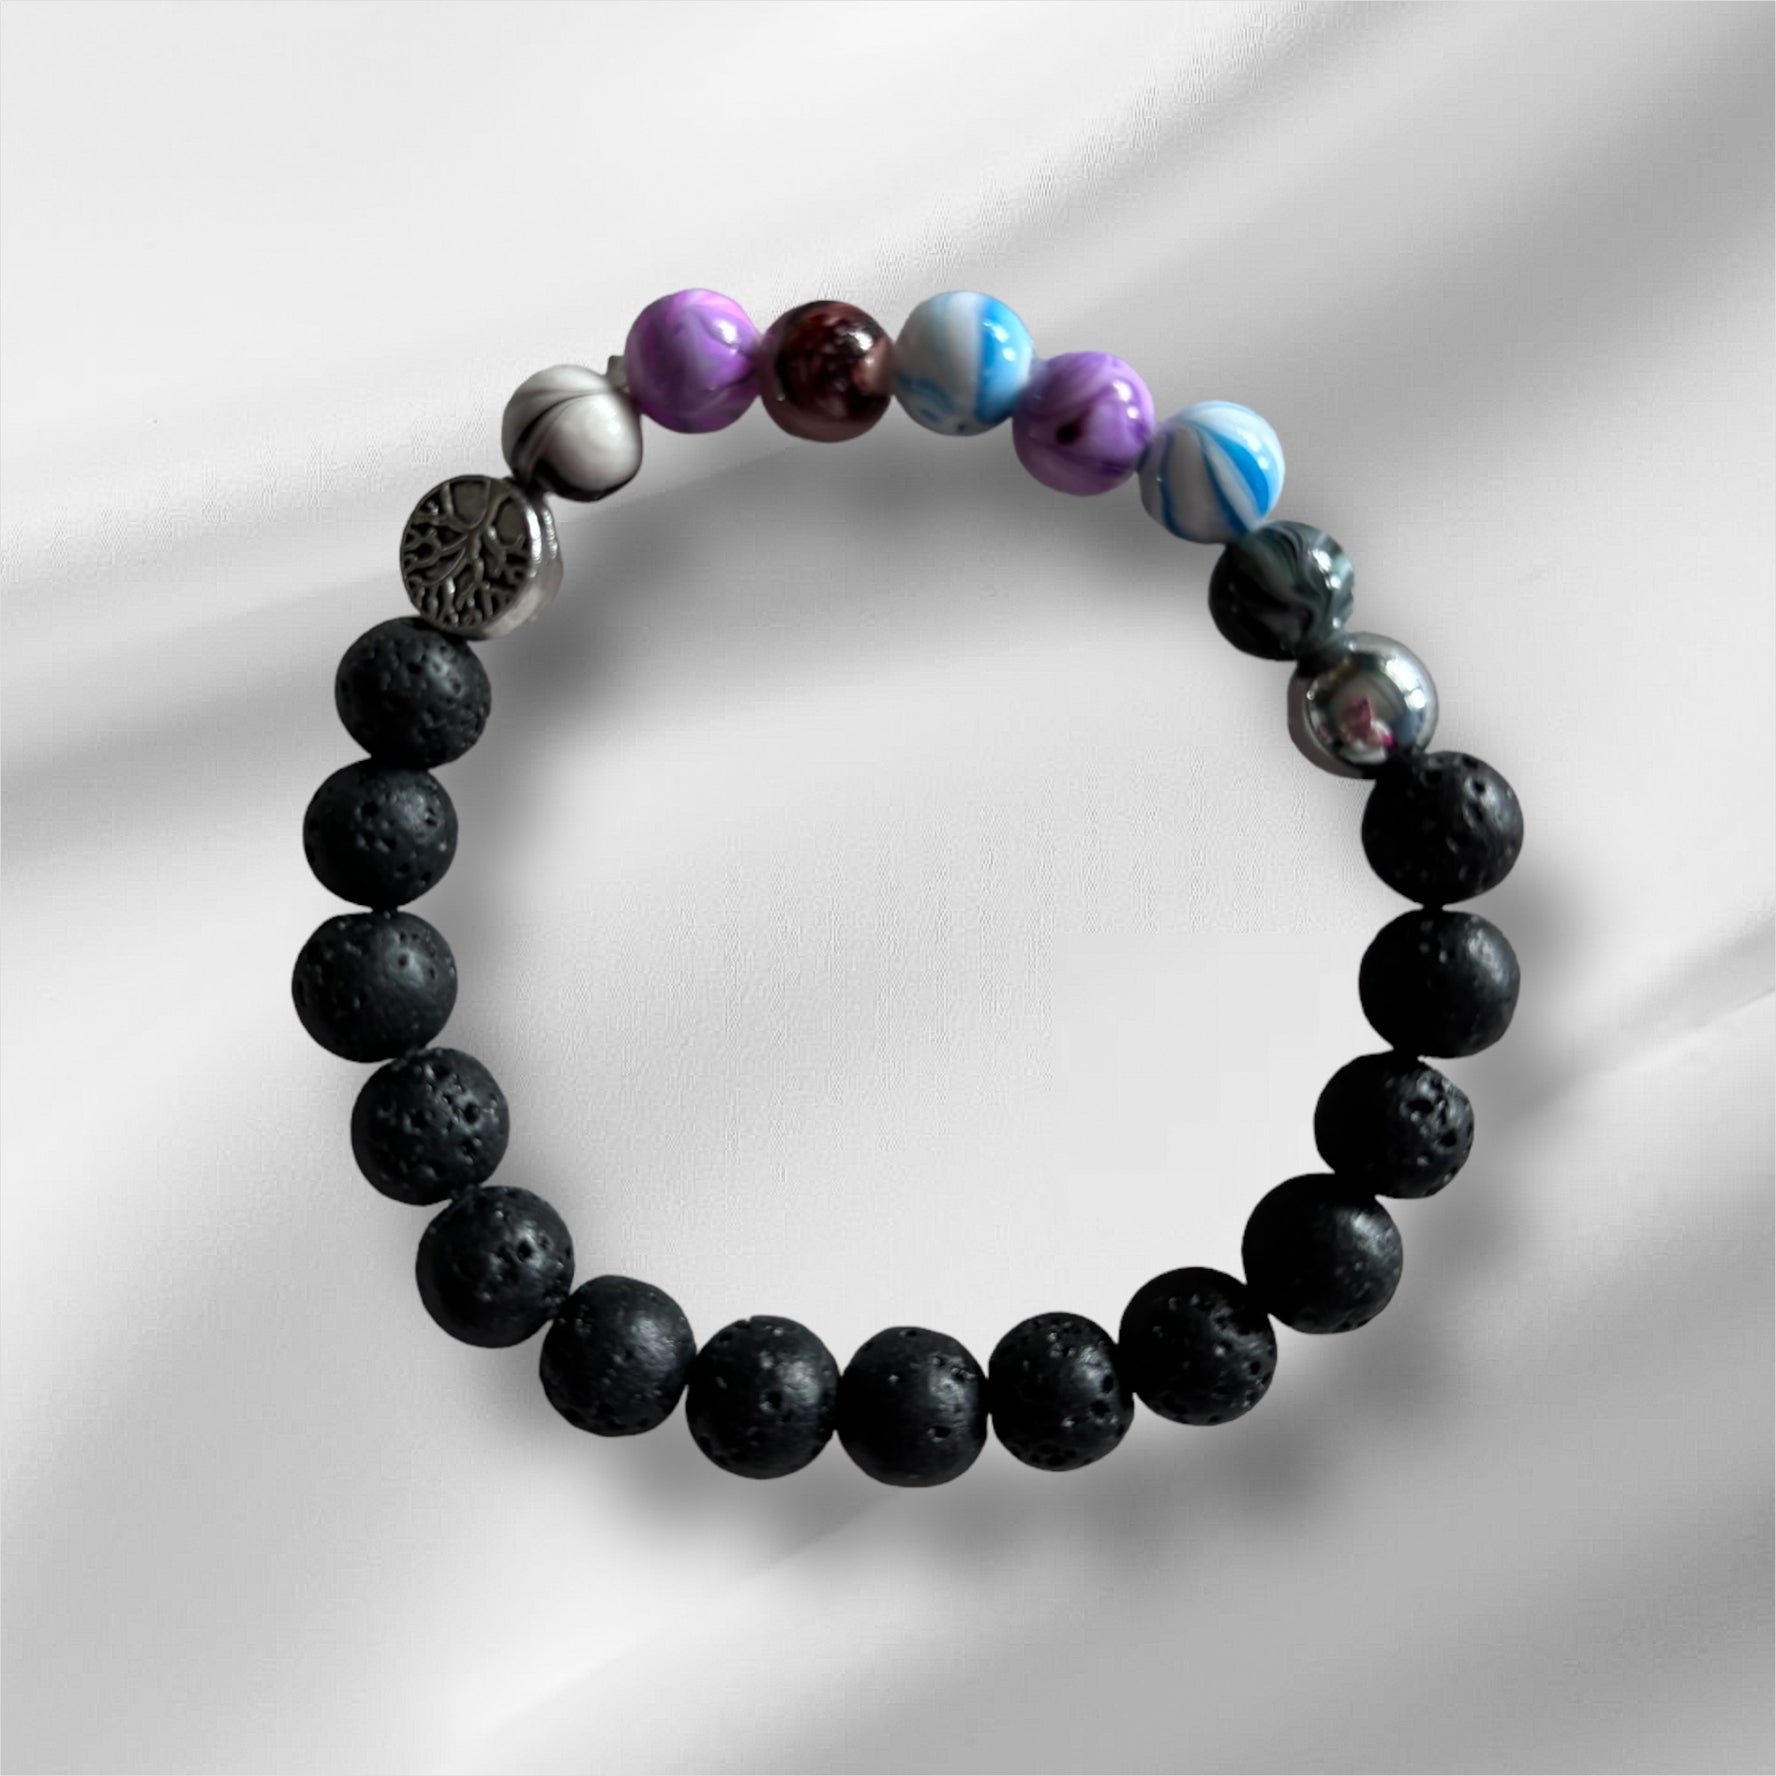 Handcrafted volcanic stone bracelet with multi-colored beads